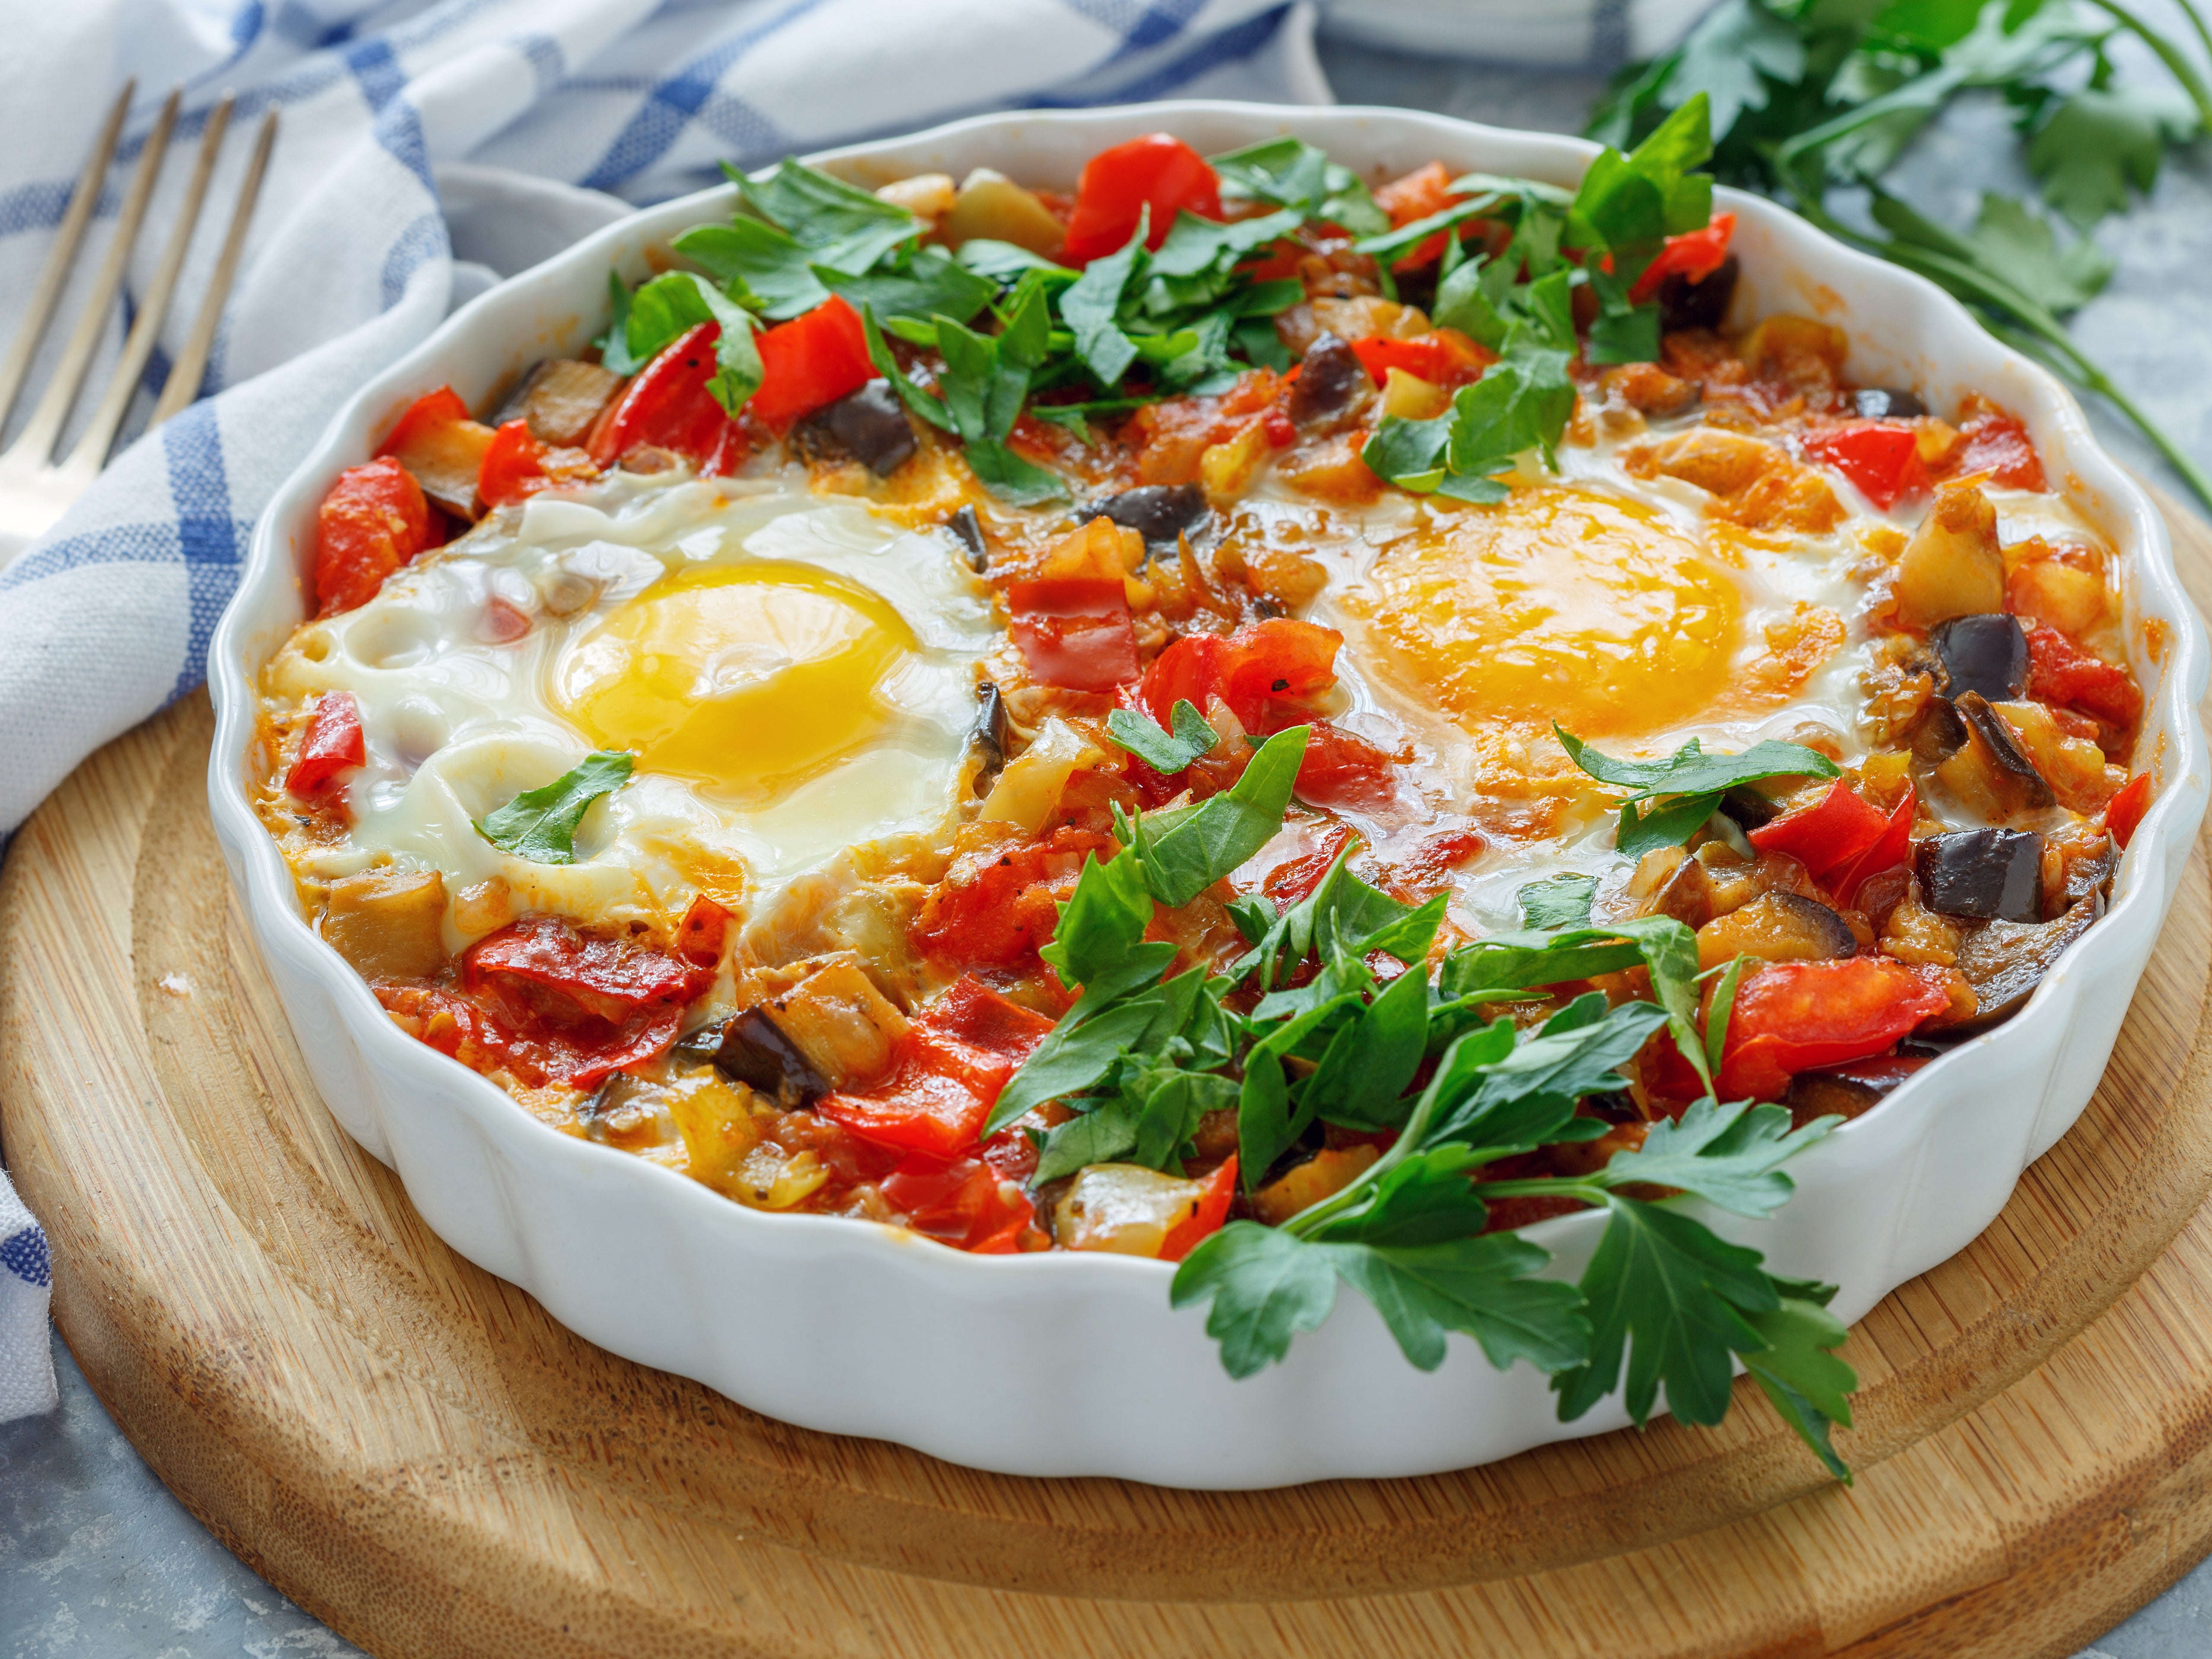 Meltingly soft: spiced aubergine and tomatoes with runny eggs